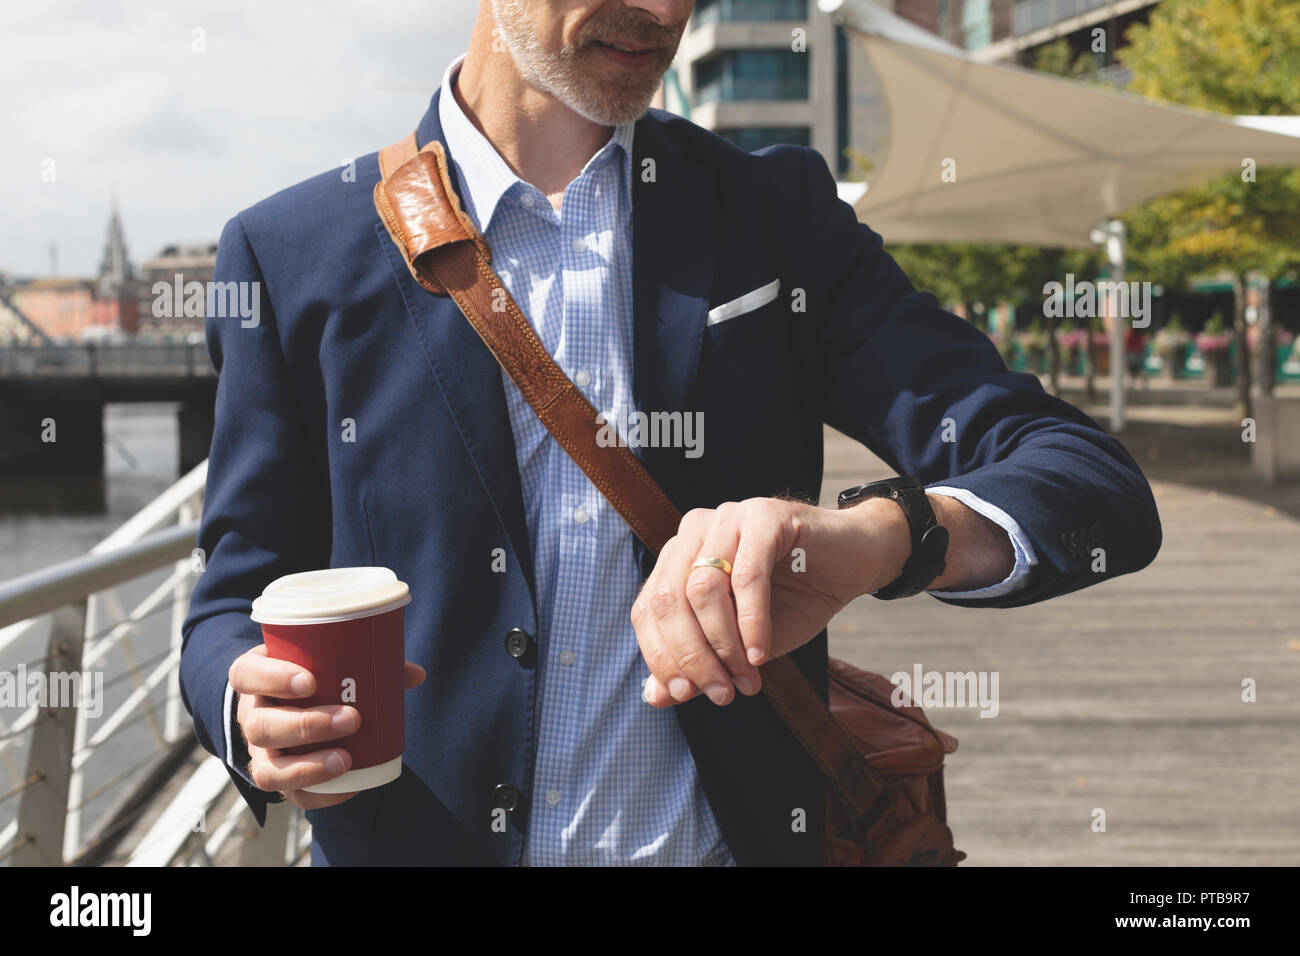 Businessman checking time on smartwatch at promenade Stock Photo